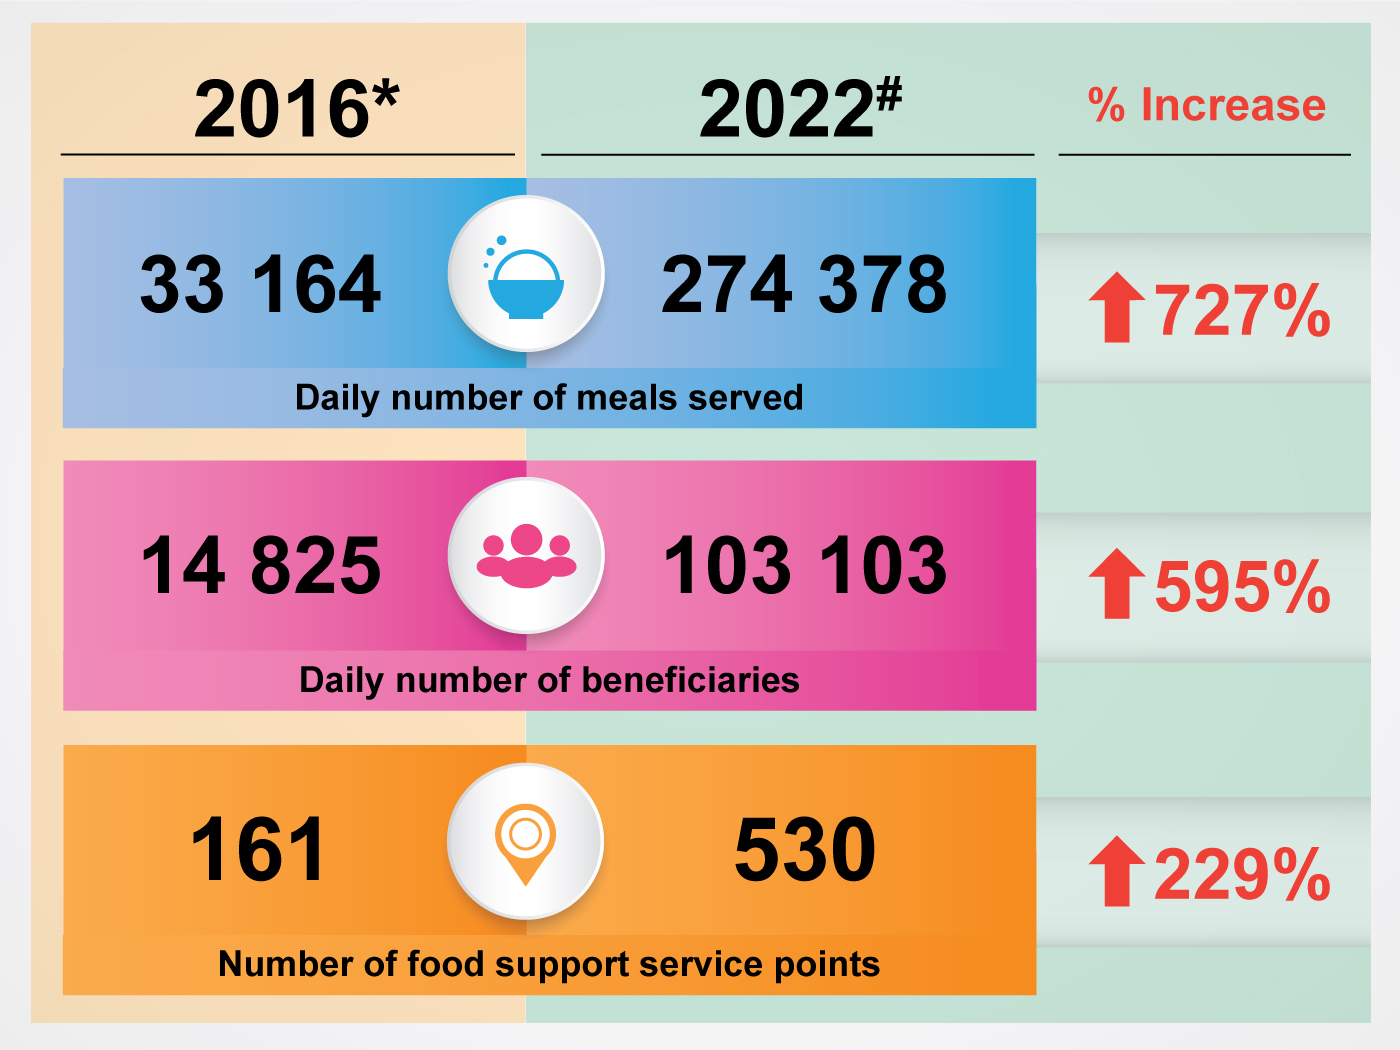 The daily number of meals served in 2016 was 33164. The number in 2022 was 274378, a 727% increment. The daily number of beneficiaries in 2016 was 14825. The number in 2022 was 103103, a 595% increment. The number of food support service points in 2016 was 161. The number in 2022 was 530, a 229% increment.